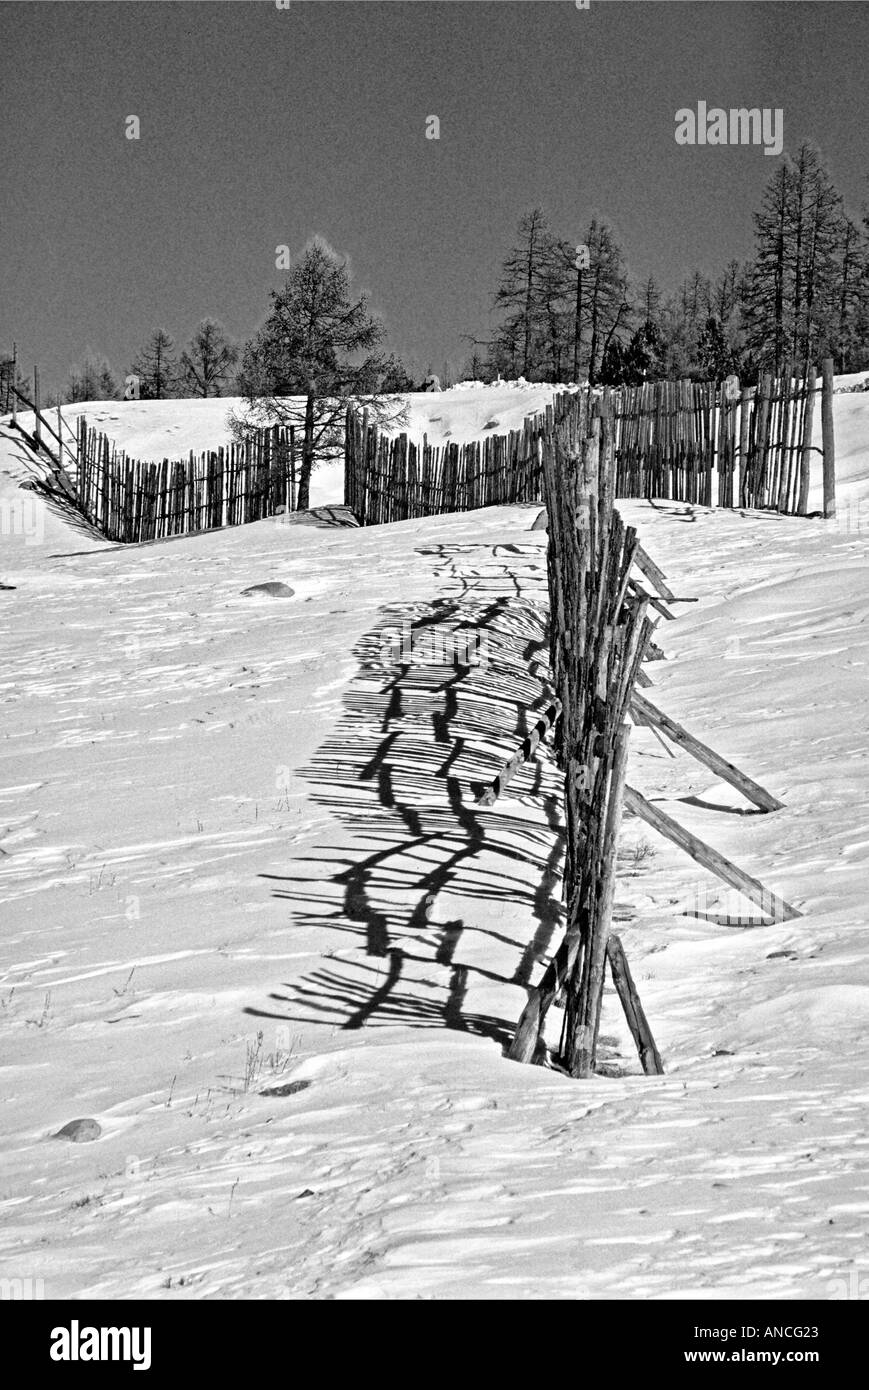 A fence in Altai mountains Stock Photo